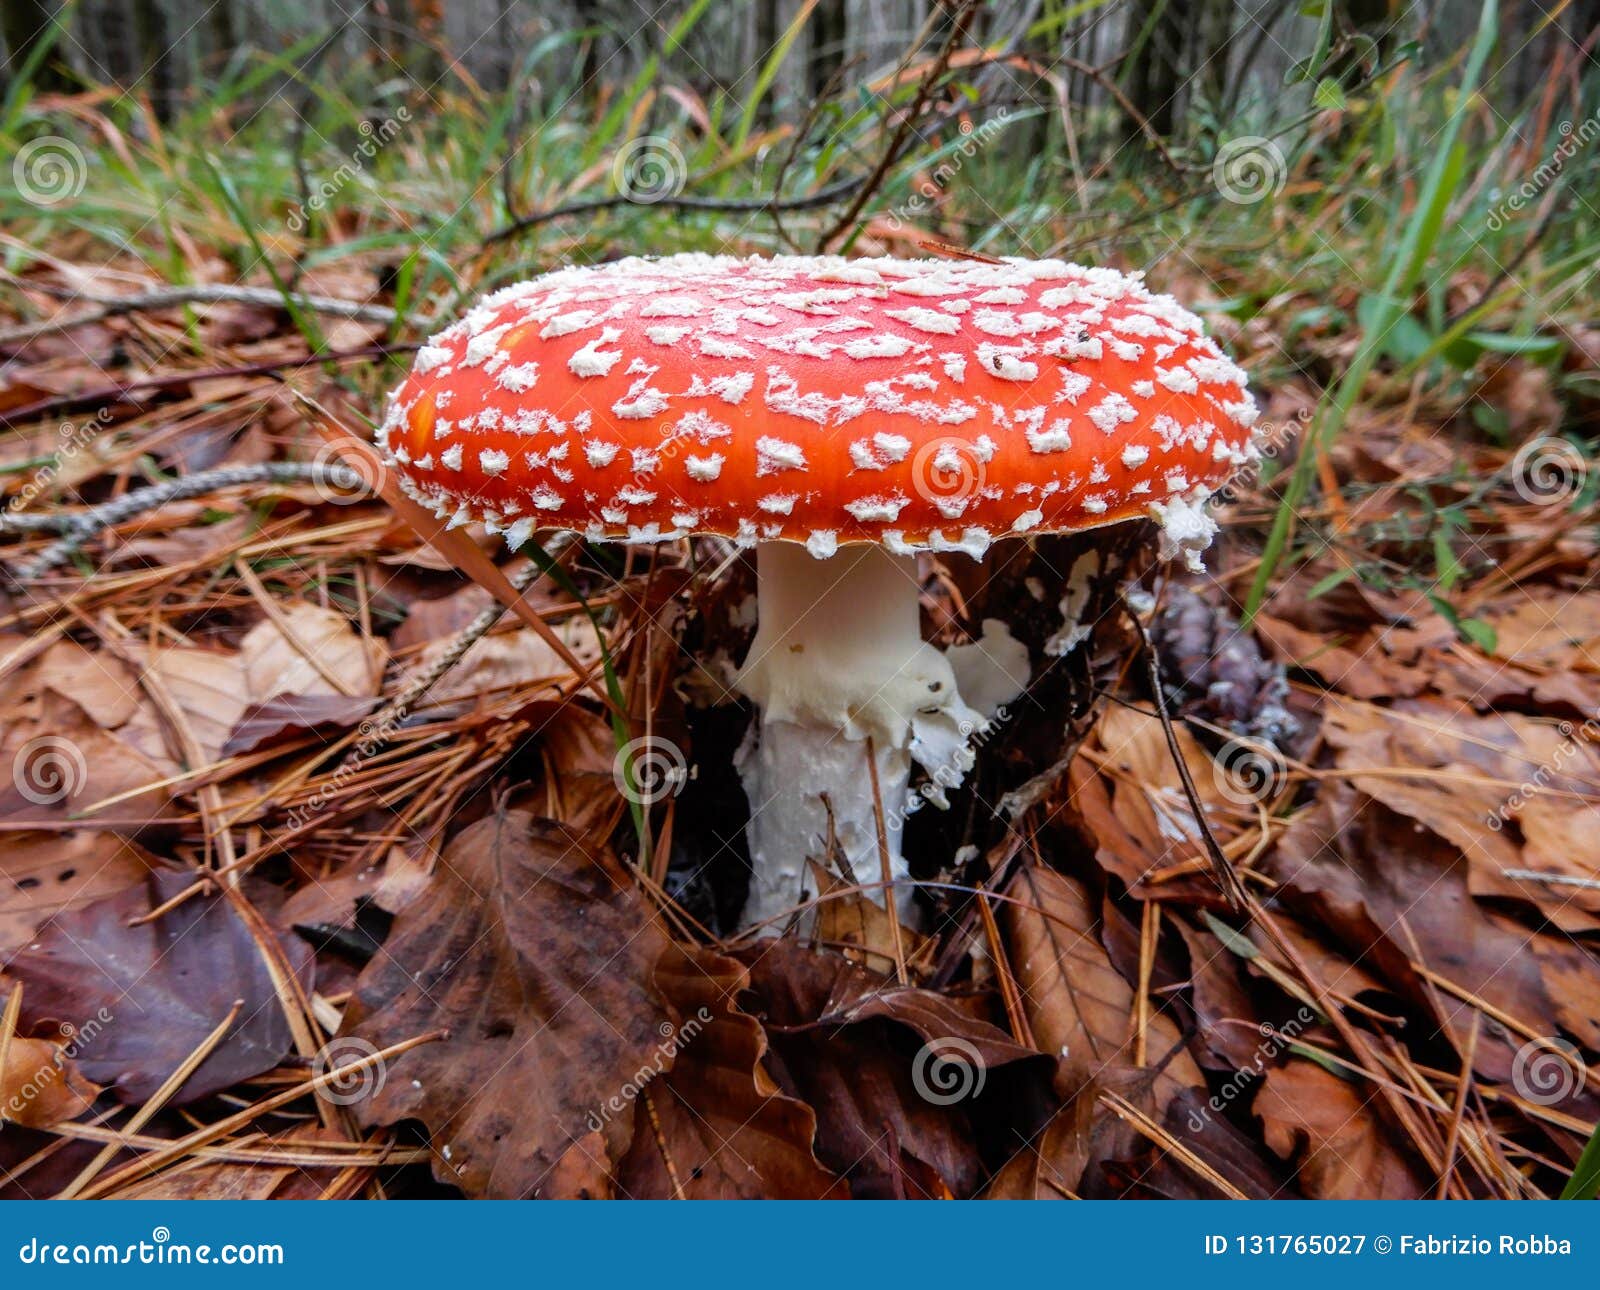 amanita muscaria mushroom close up in a forest of beeches, italy